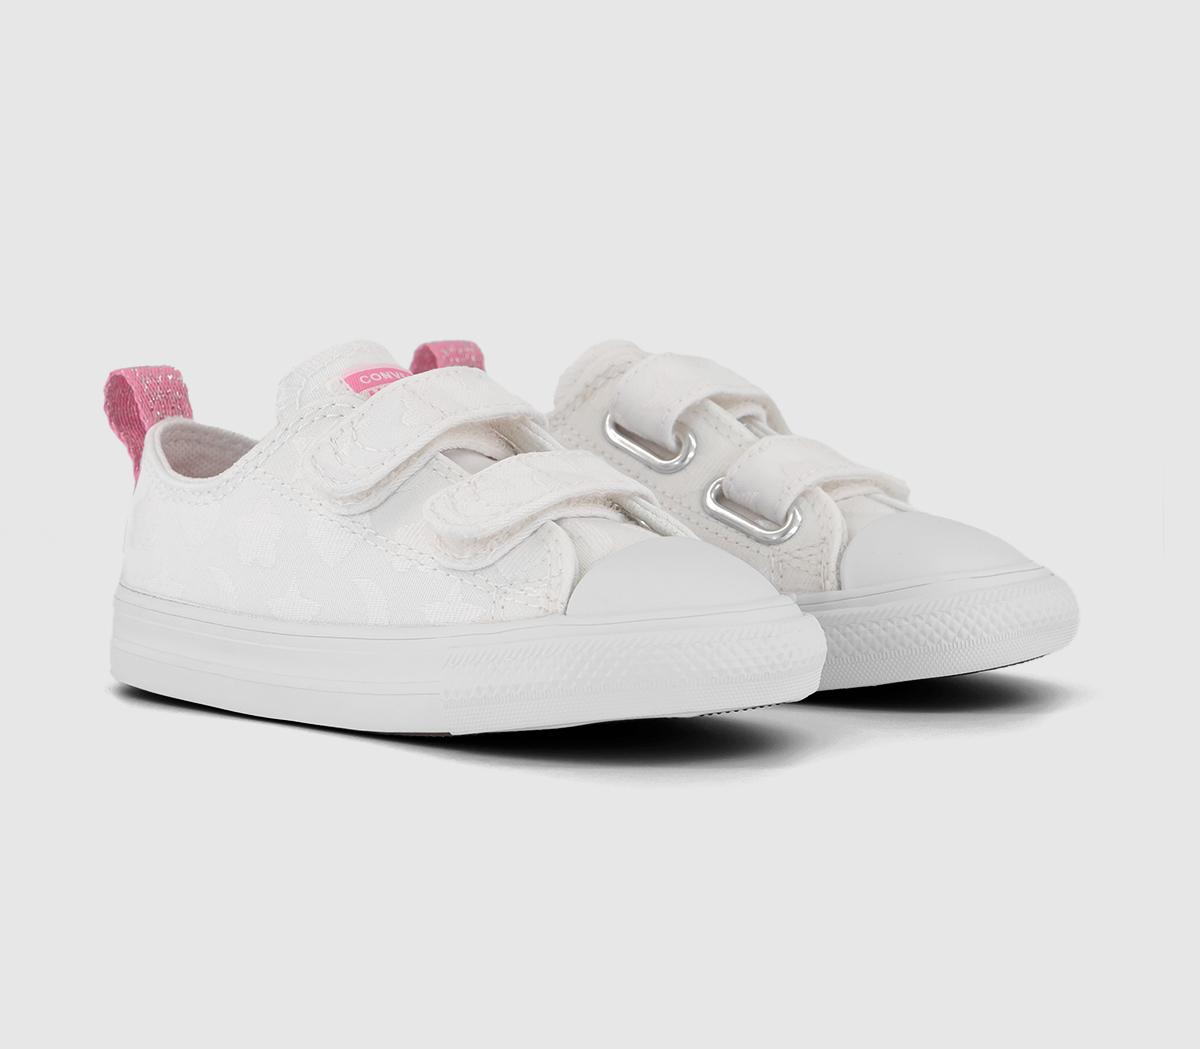 Converse Kids All Star 2vlace Trainers White Oops Pink, 10 Youth